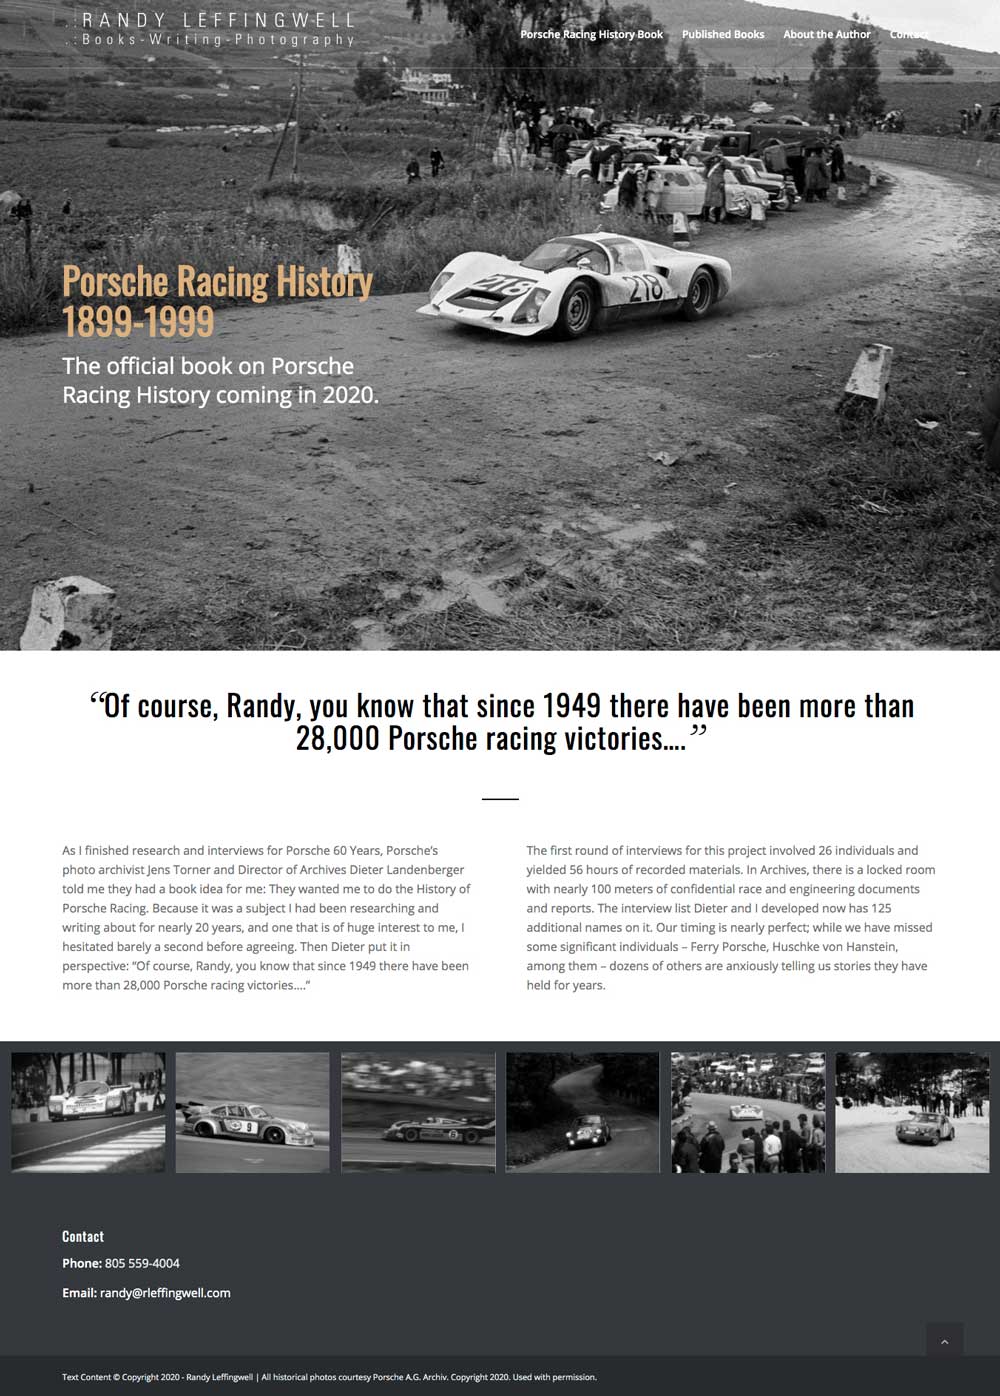 Randy Leffinwell Porsche Racing History home page race car driving through muddy country road and onlookers